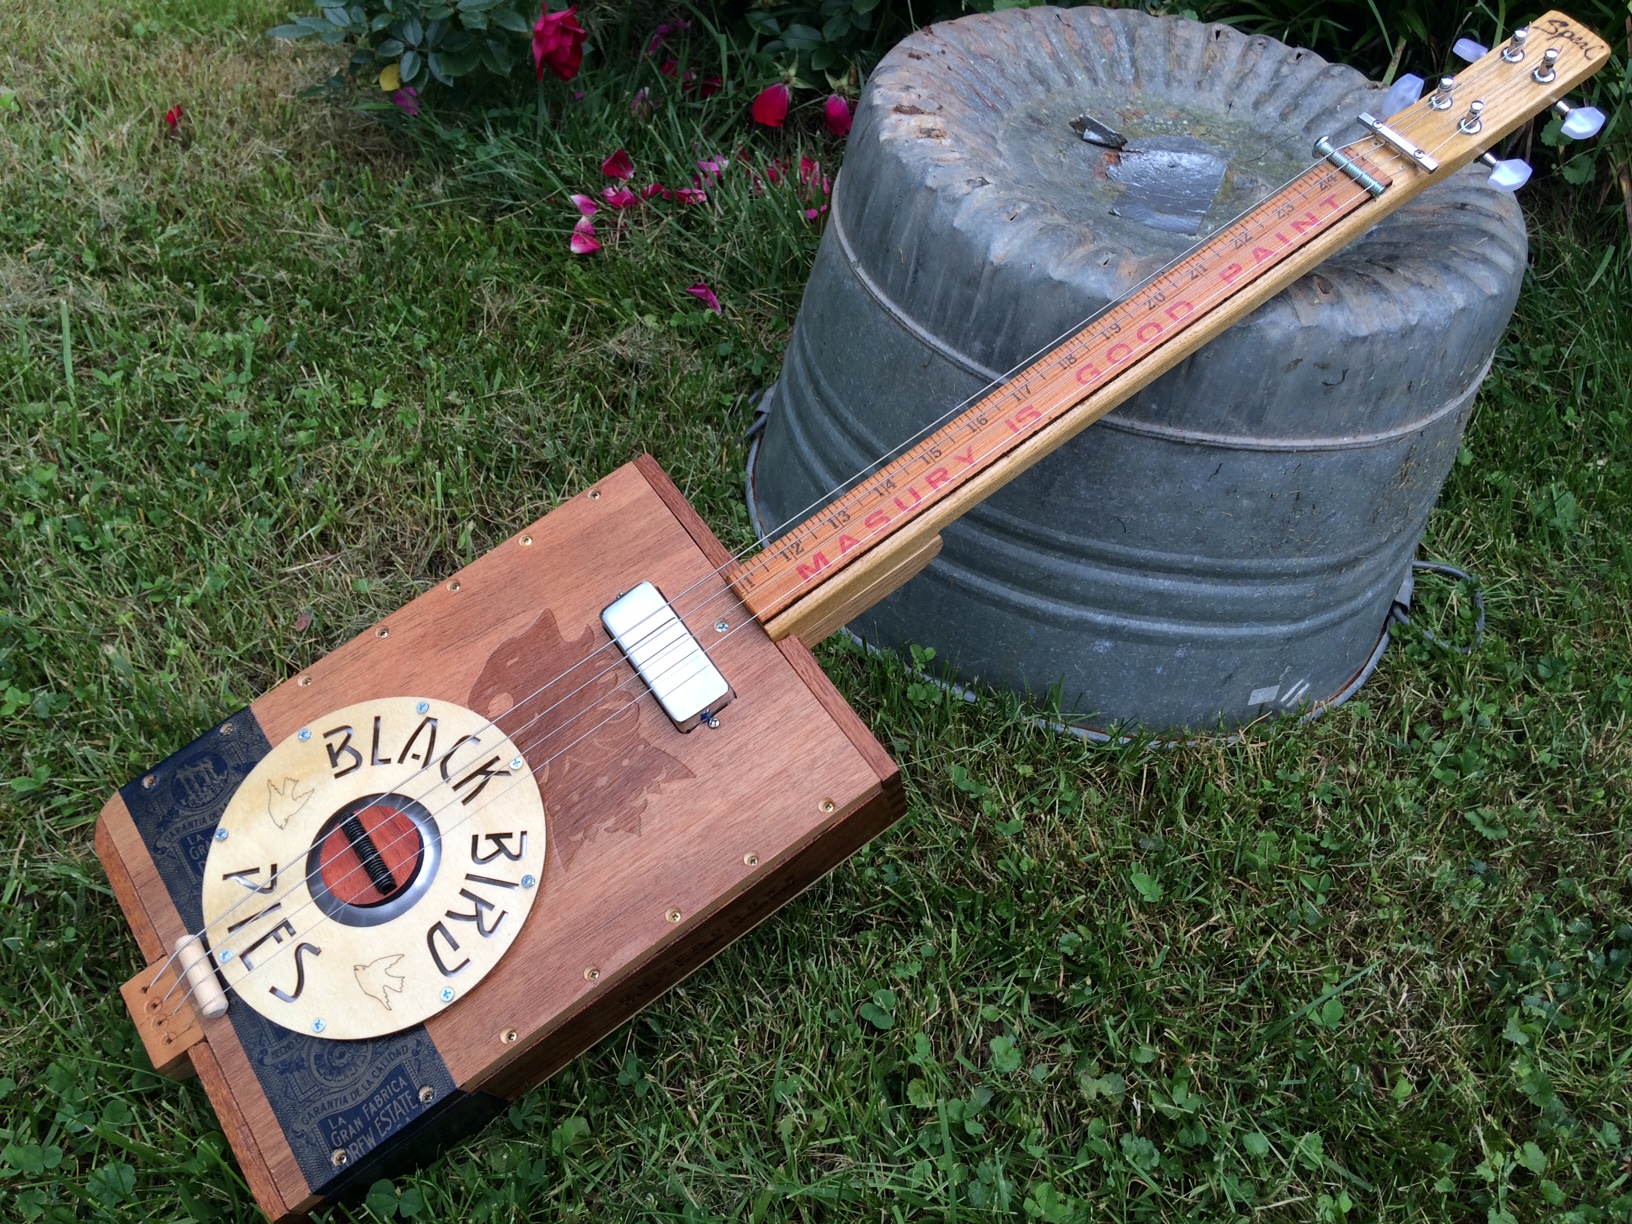 Shane Speal Signature 3-String Cigar Box Guitar Tuners - C. B. Gitty  Crafter Supply